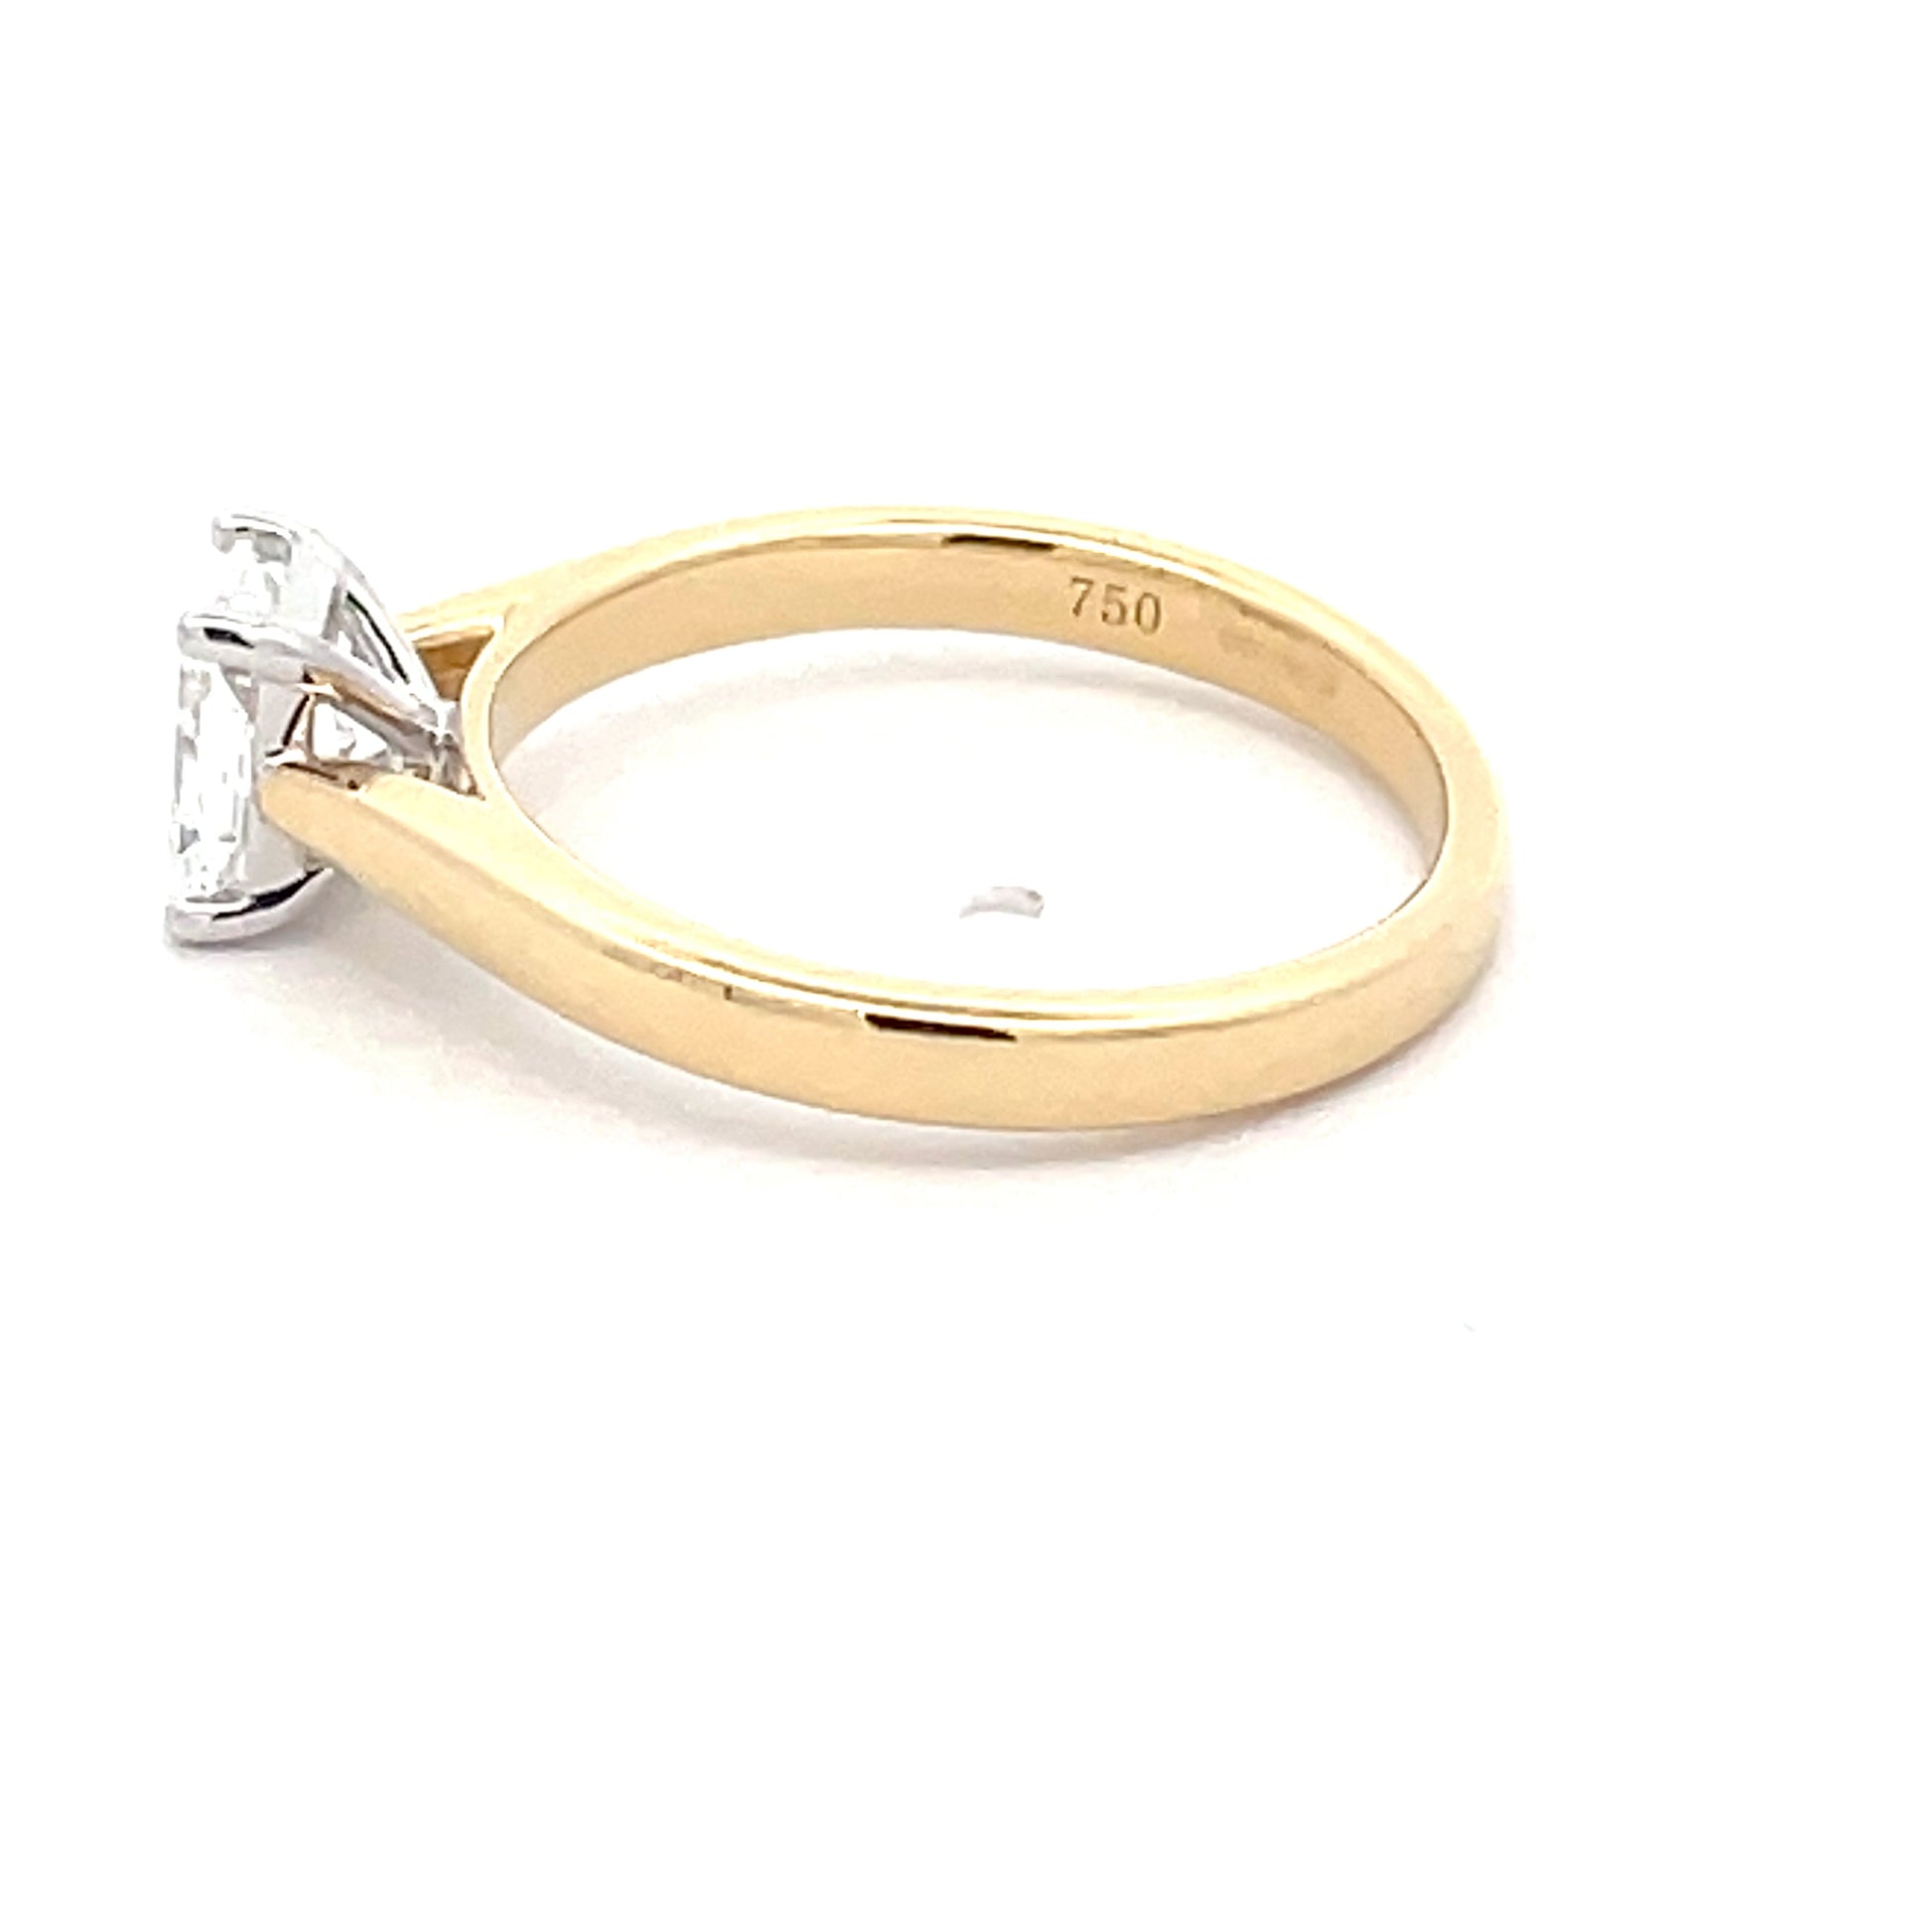 Radiant Cut Diamond Solitaire Ring - 0.71ct  Gardiner Brothers   